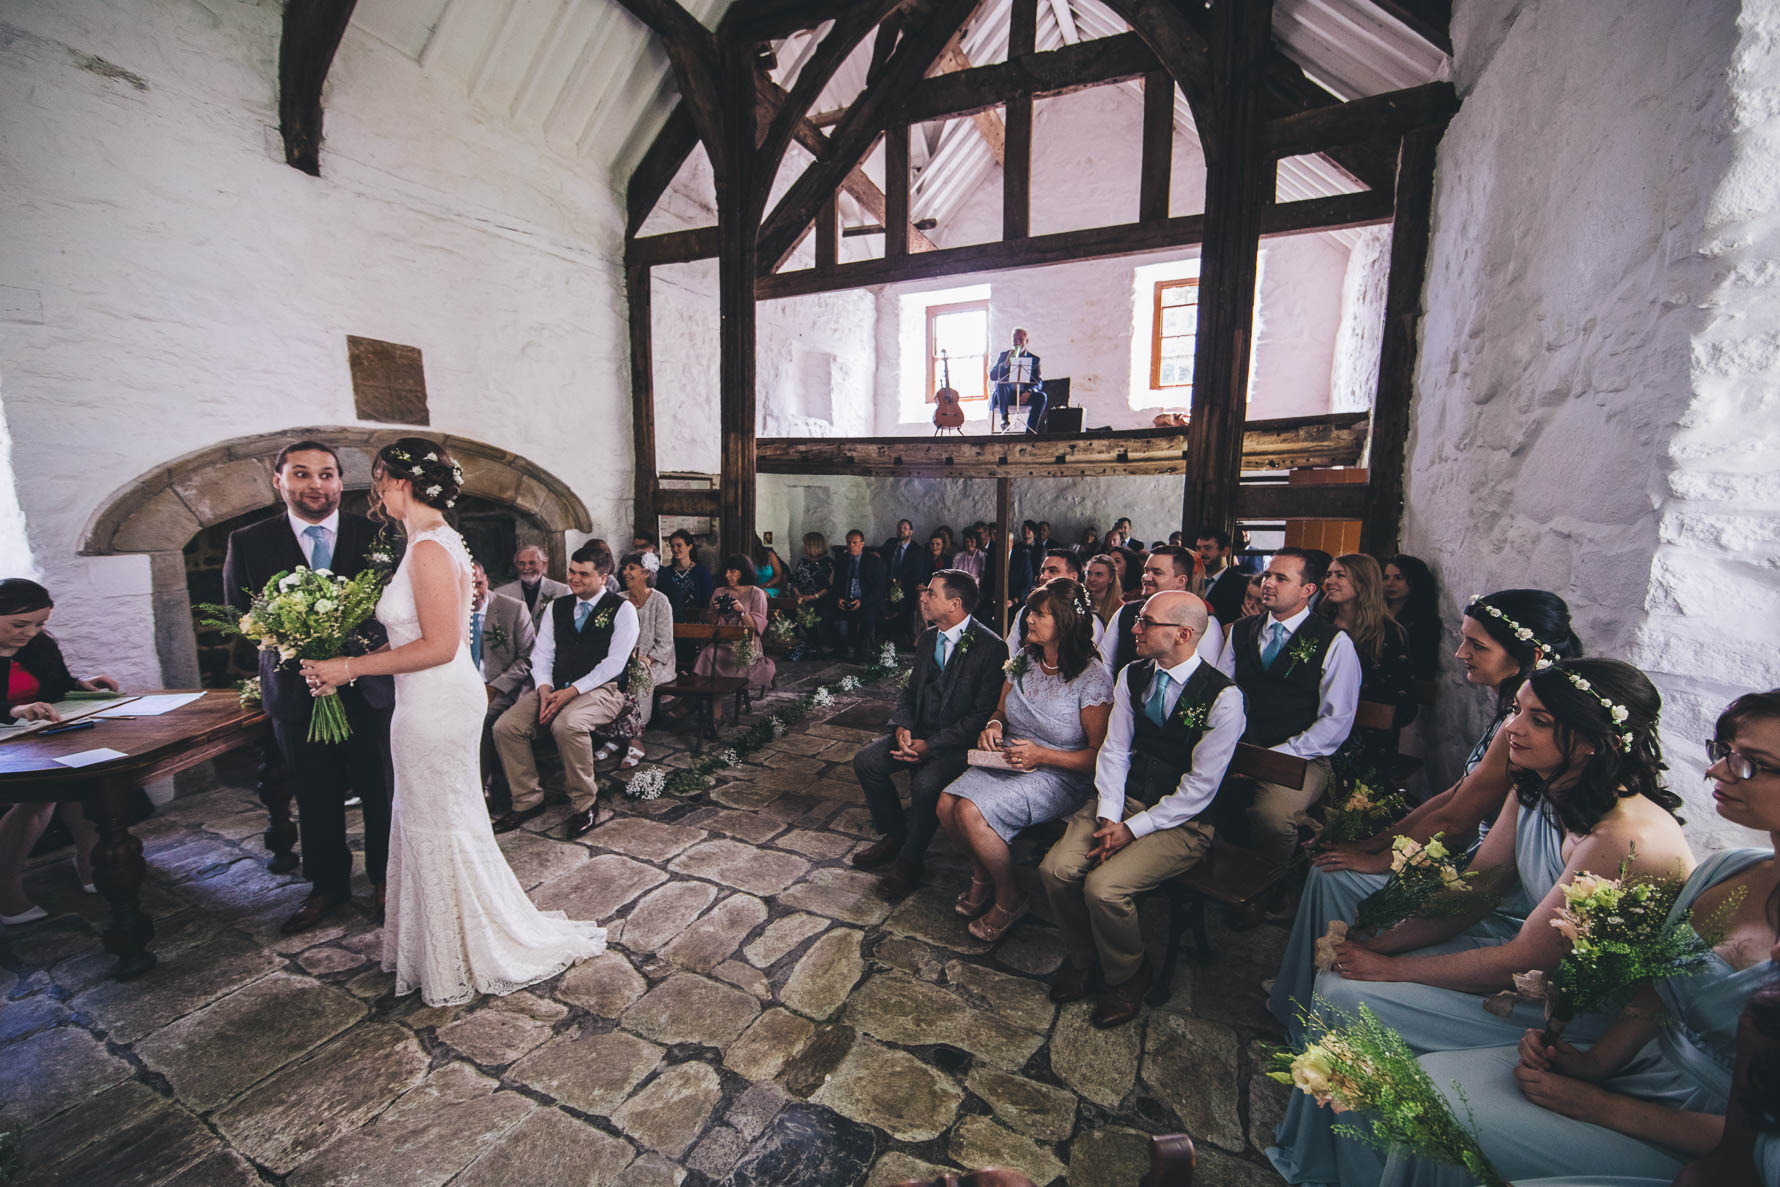 Bride holding a large bouquet of flowers stood next to the groom during their wedding ceremony in a large white washed building with wooden beams and a pitched roof